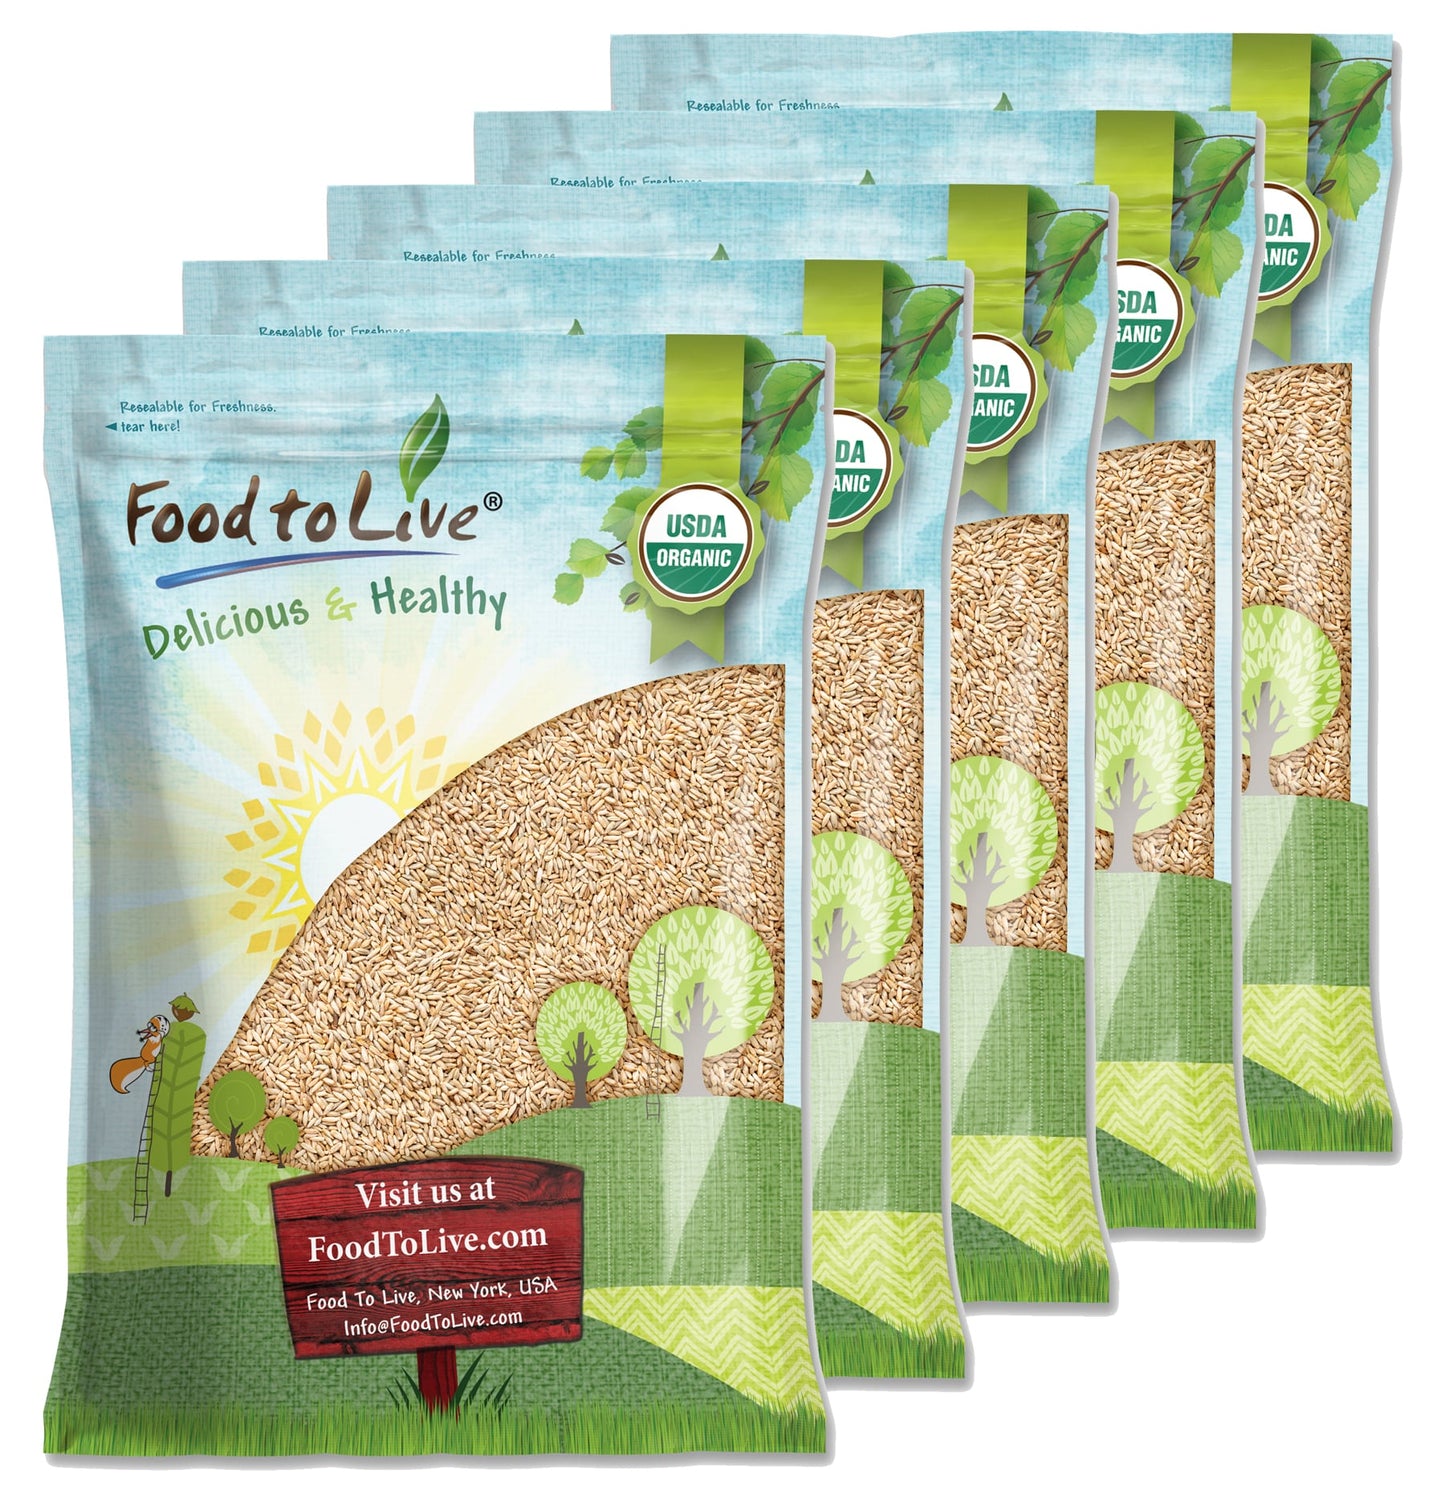 Organic Rye Berries - Non-GMO, Kosher, Raw, Bulk Seeds, Product of the USA - by Food to Live